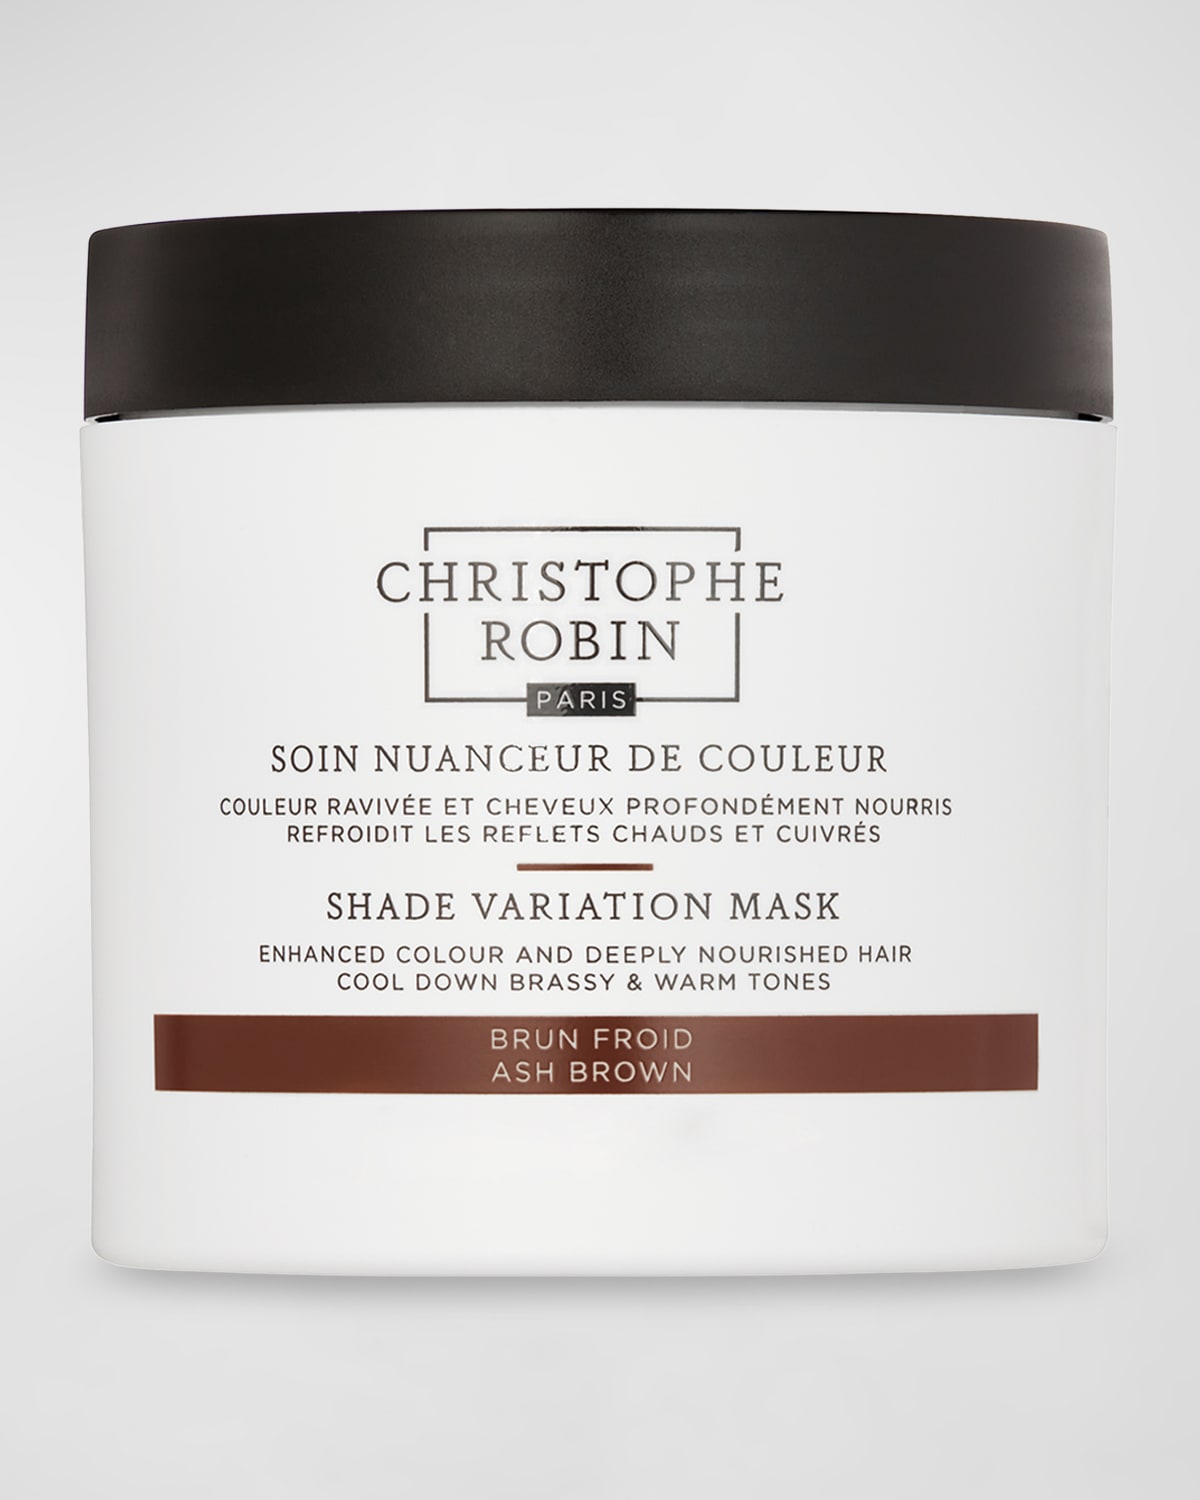 Christophe Robin Shade Variation Care Nutritive Mask with Temporary Coloring &#150; Ash Brown, 8.4 oz./ 250 mL